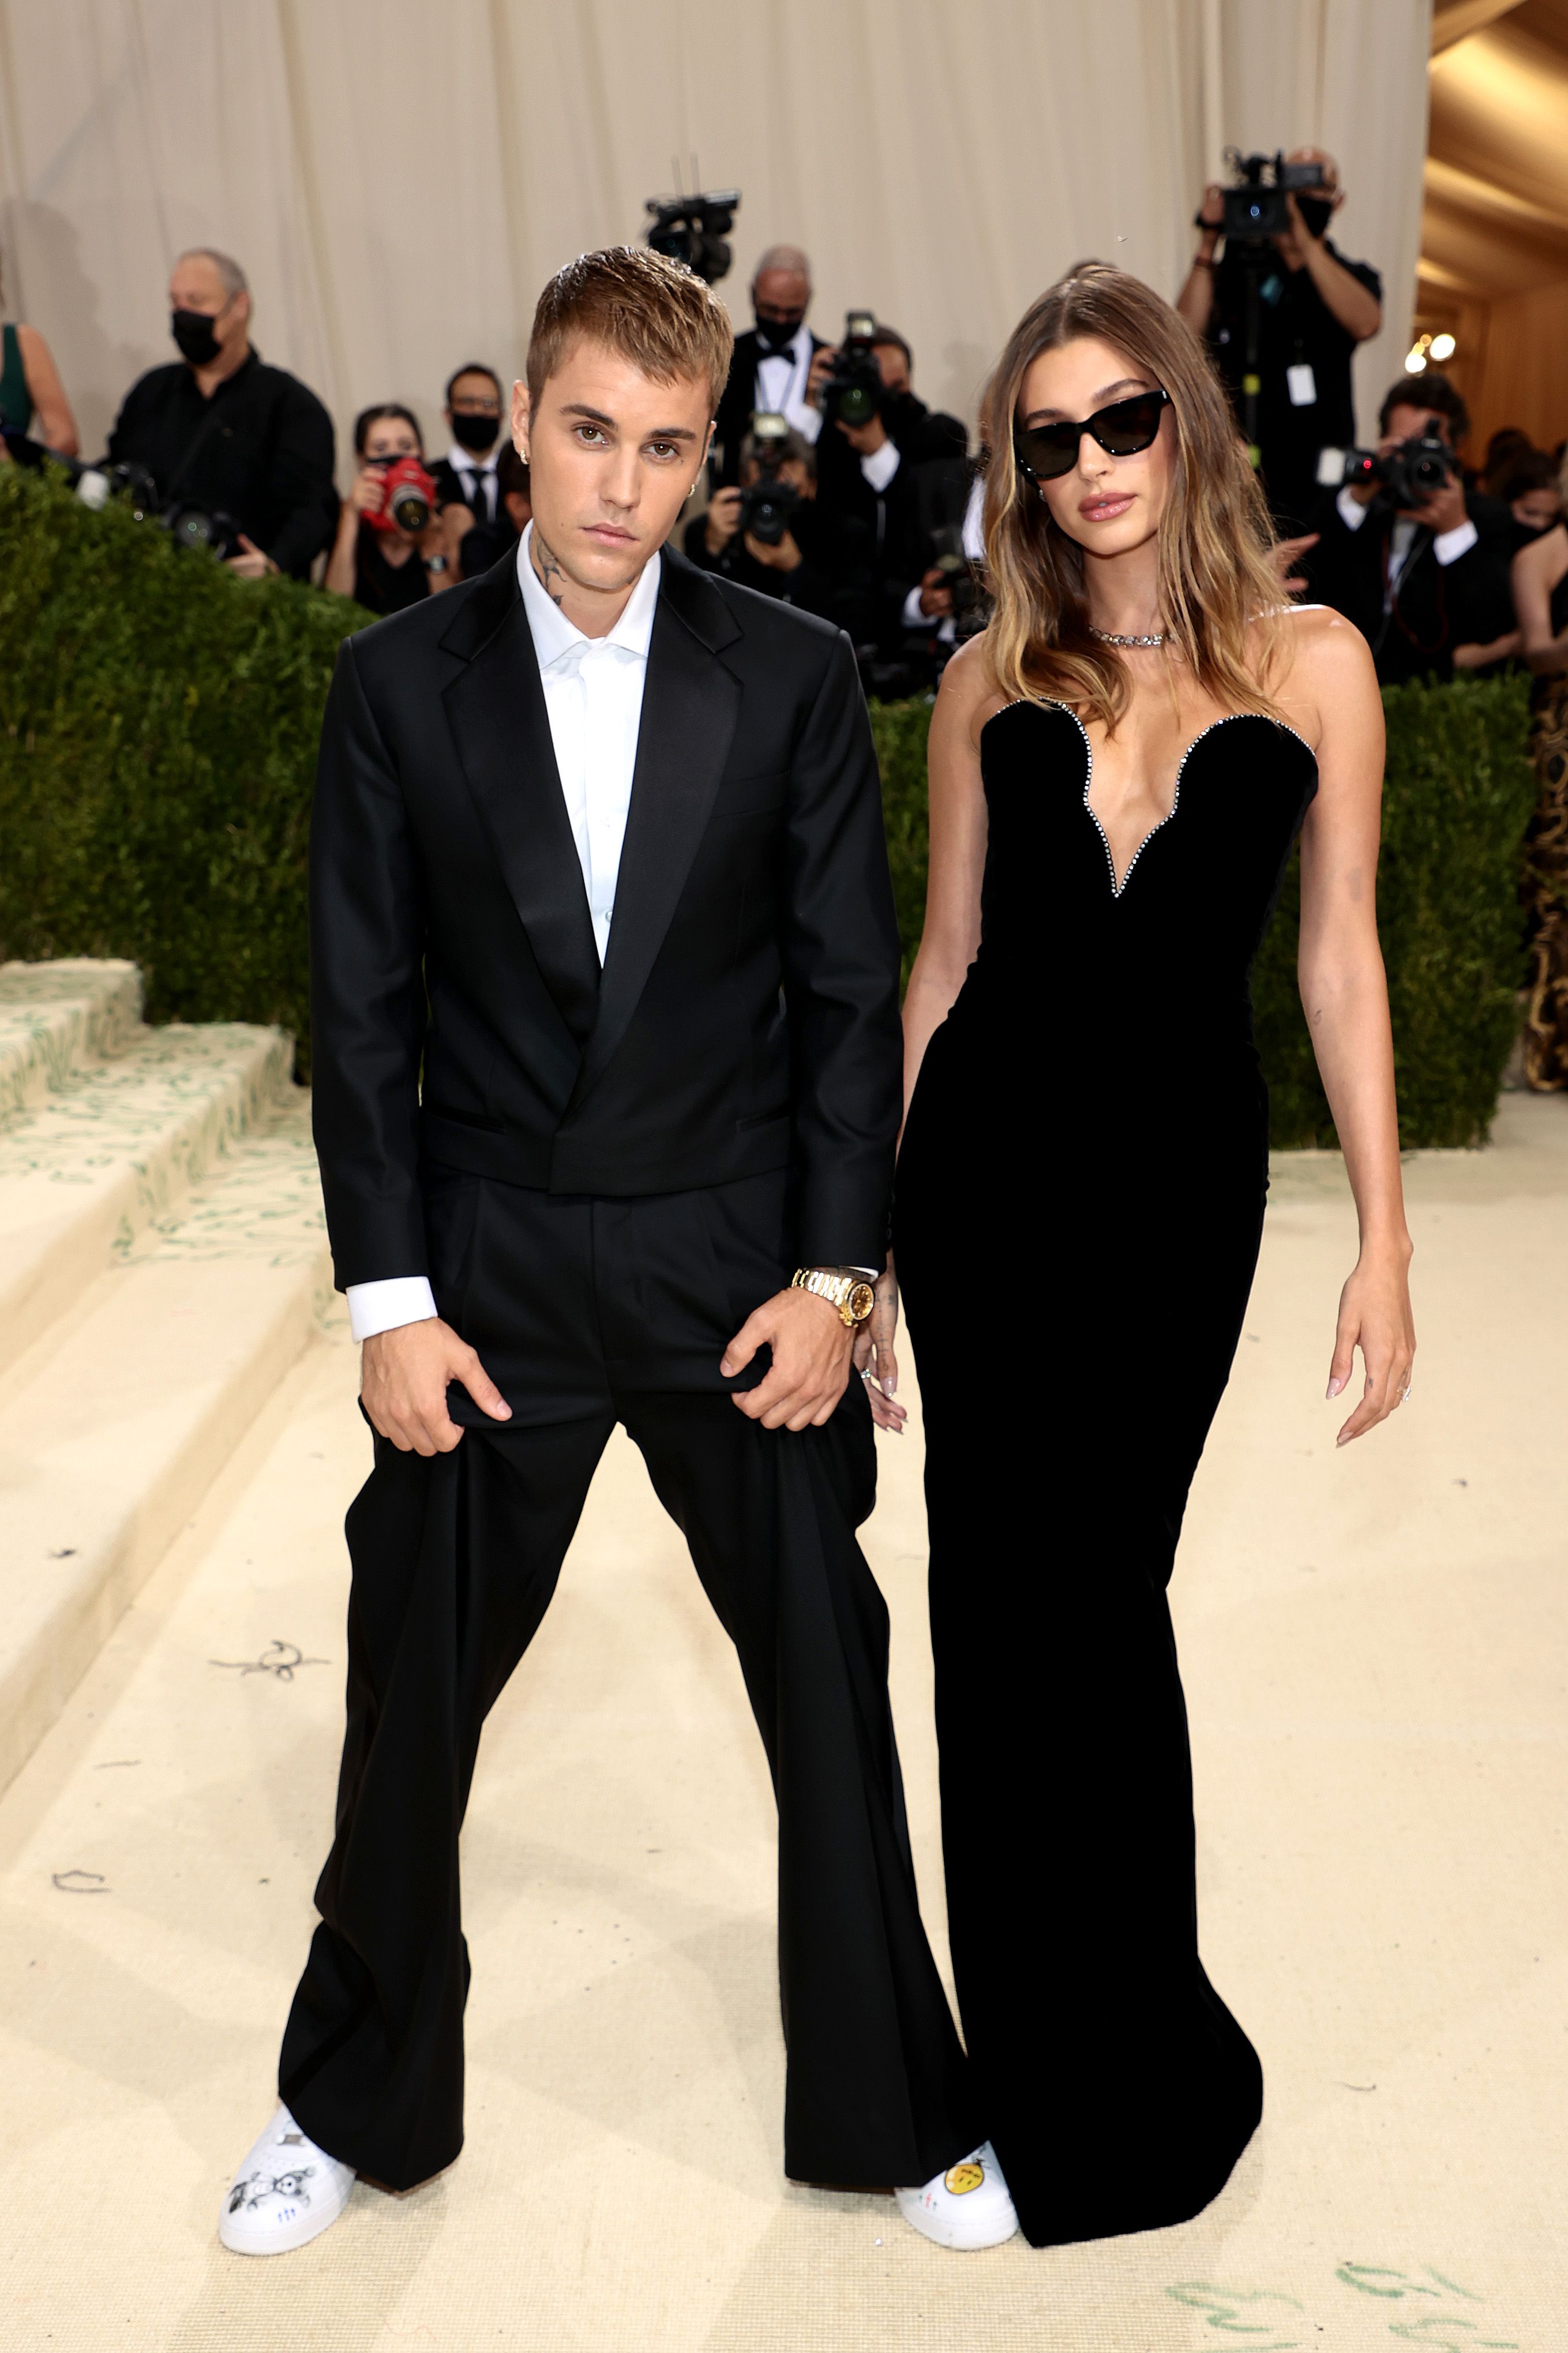 new york, new york september 13 justin bieber and hailey bieber attend the 2021 met gala celebrating in america a lexicon of fashion at metropolitan museum of art on september 13, 2021 in new york city photo by dimitrios kambourisgetty images for the met museumvogue